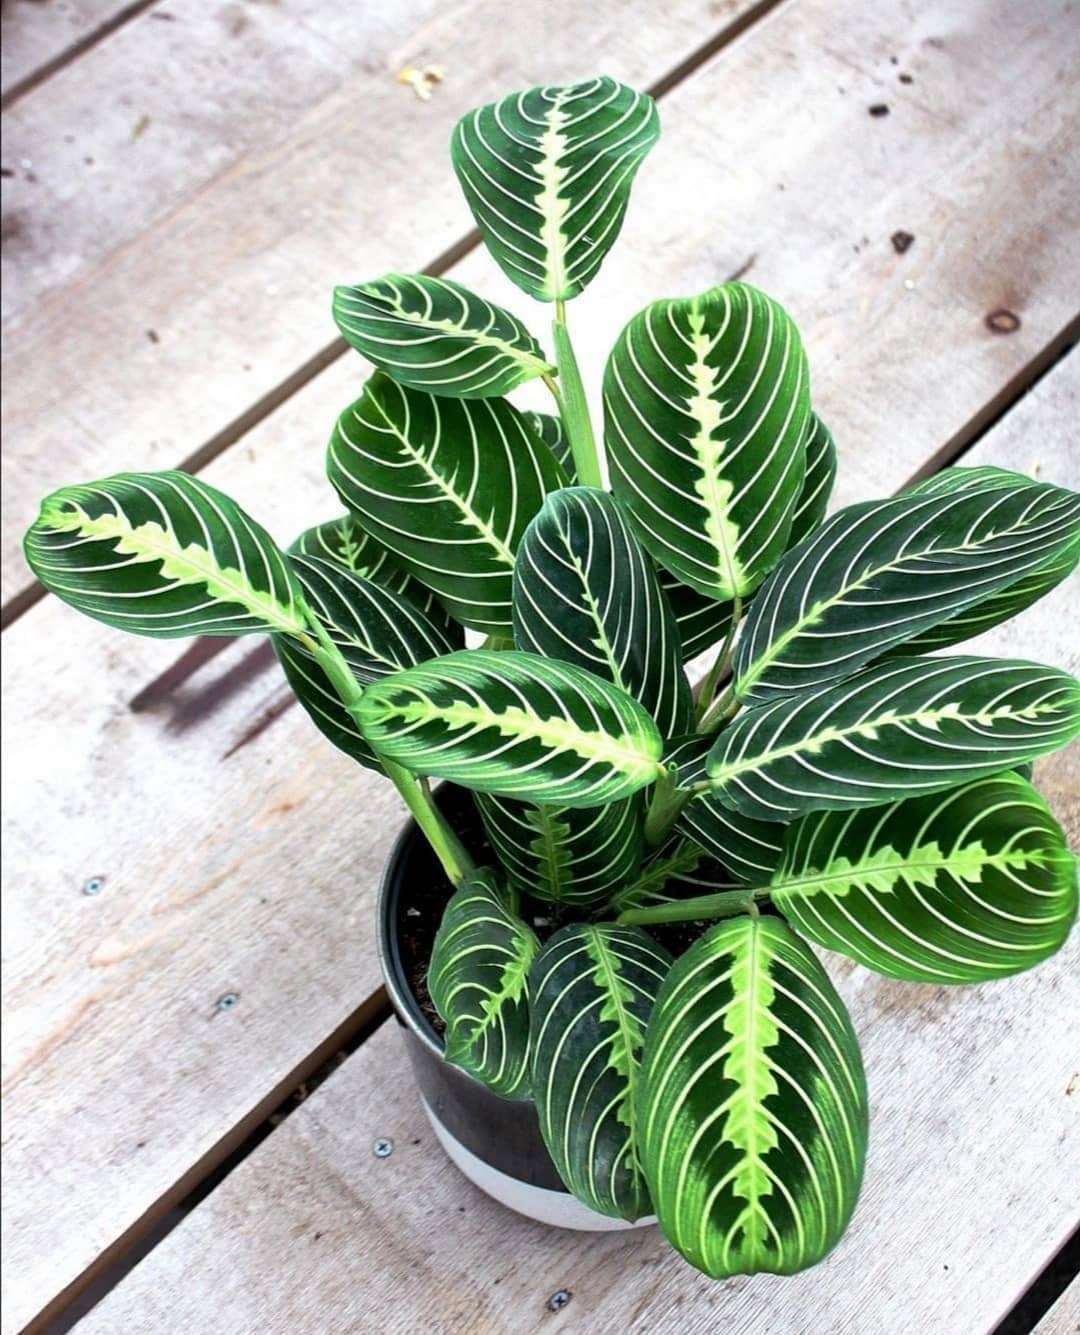 personalized green prayer plant care: water, light, nutrients